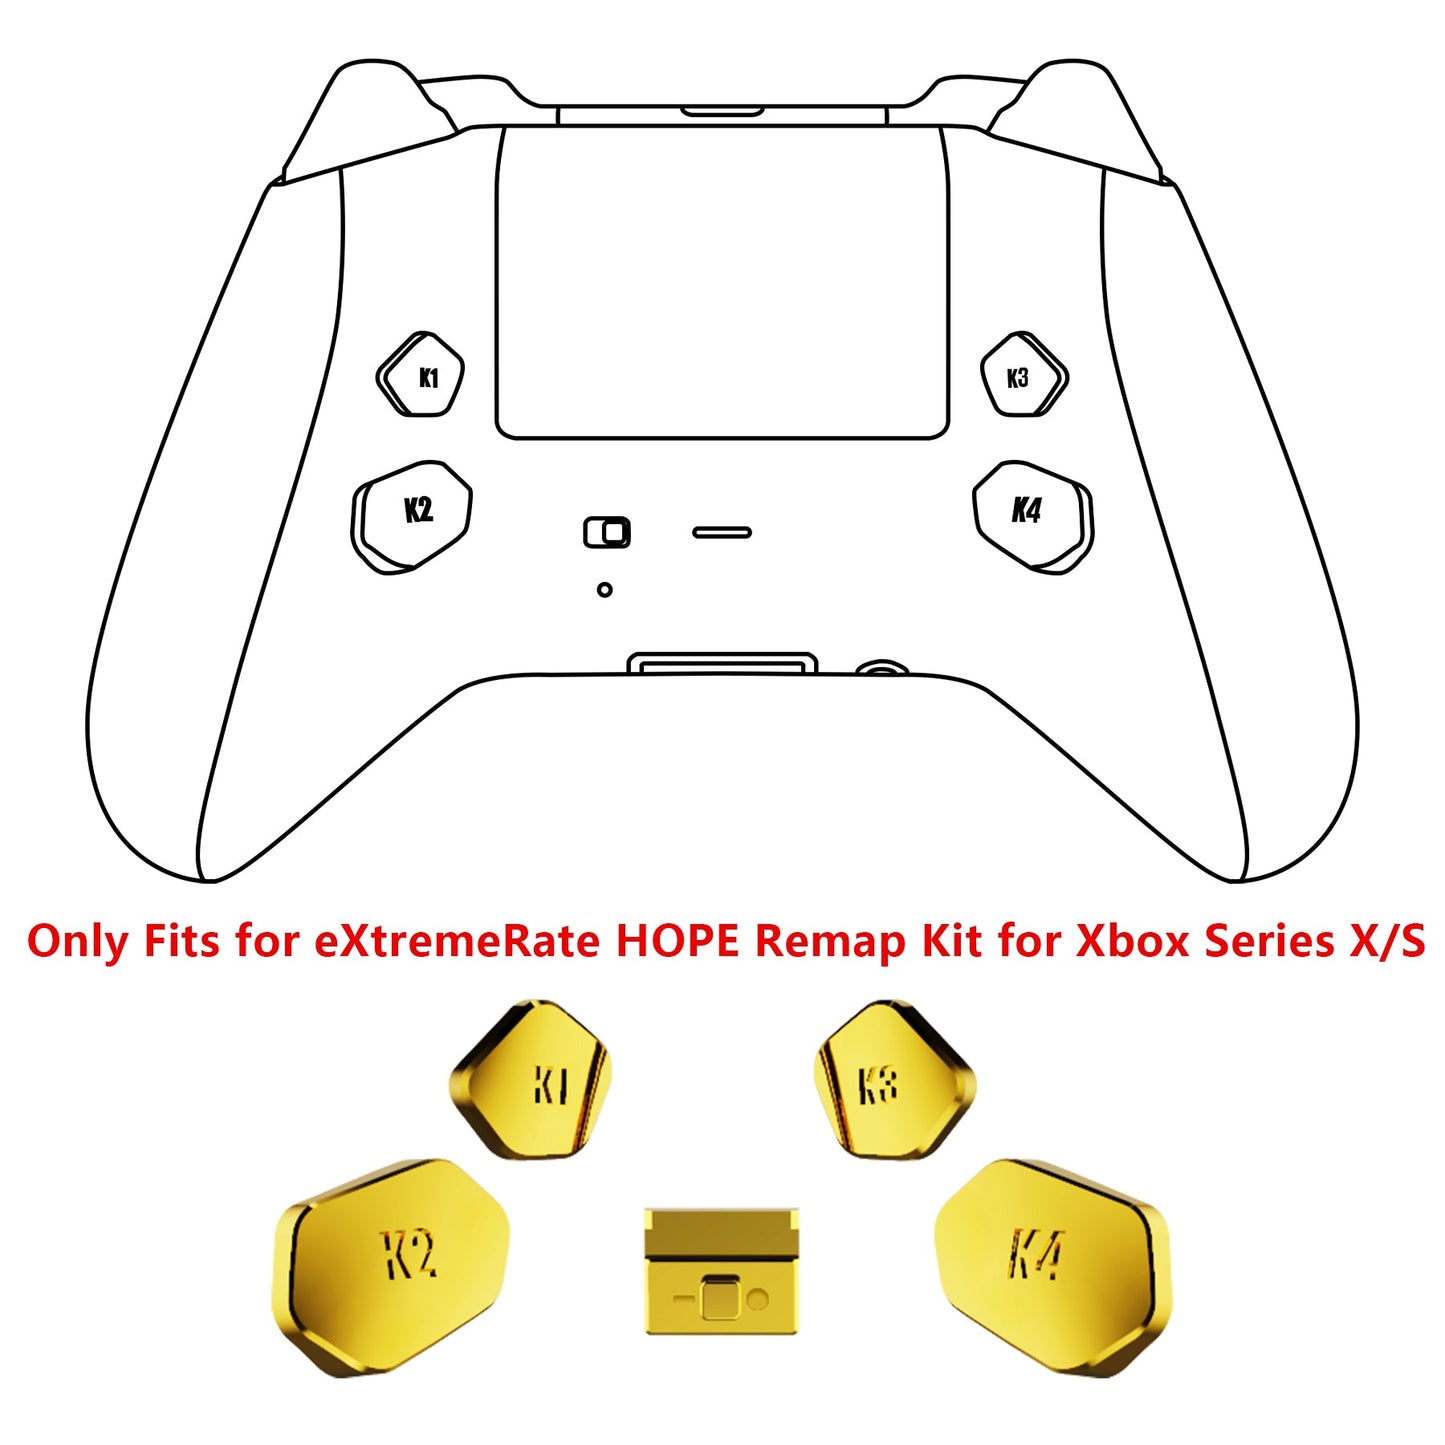 eXtremeRate Retail Chrome Gold Replacement Redesigned K1 K2 K3 K4 Back Buttons Paddles & Toggle Switch for Xbox Series X/S Controller eXtremerate Hope Remap Kit - Controller & Hope Remap Board NOT Included - DX3D4001